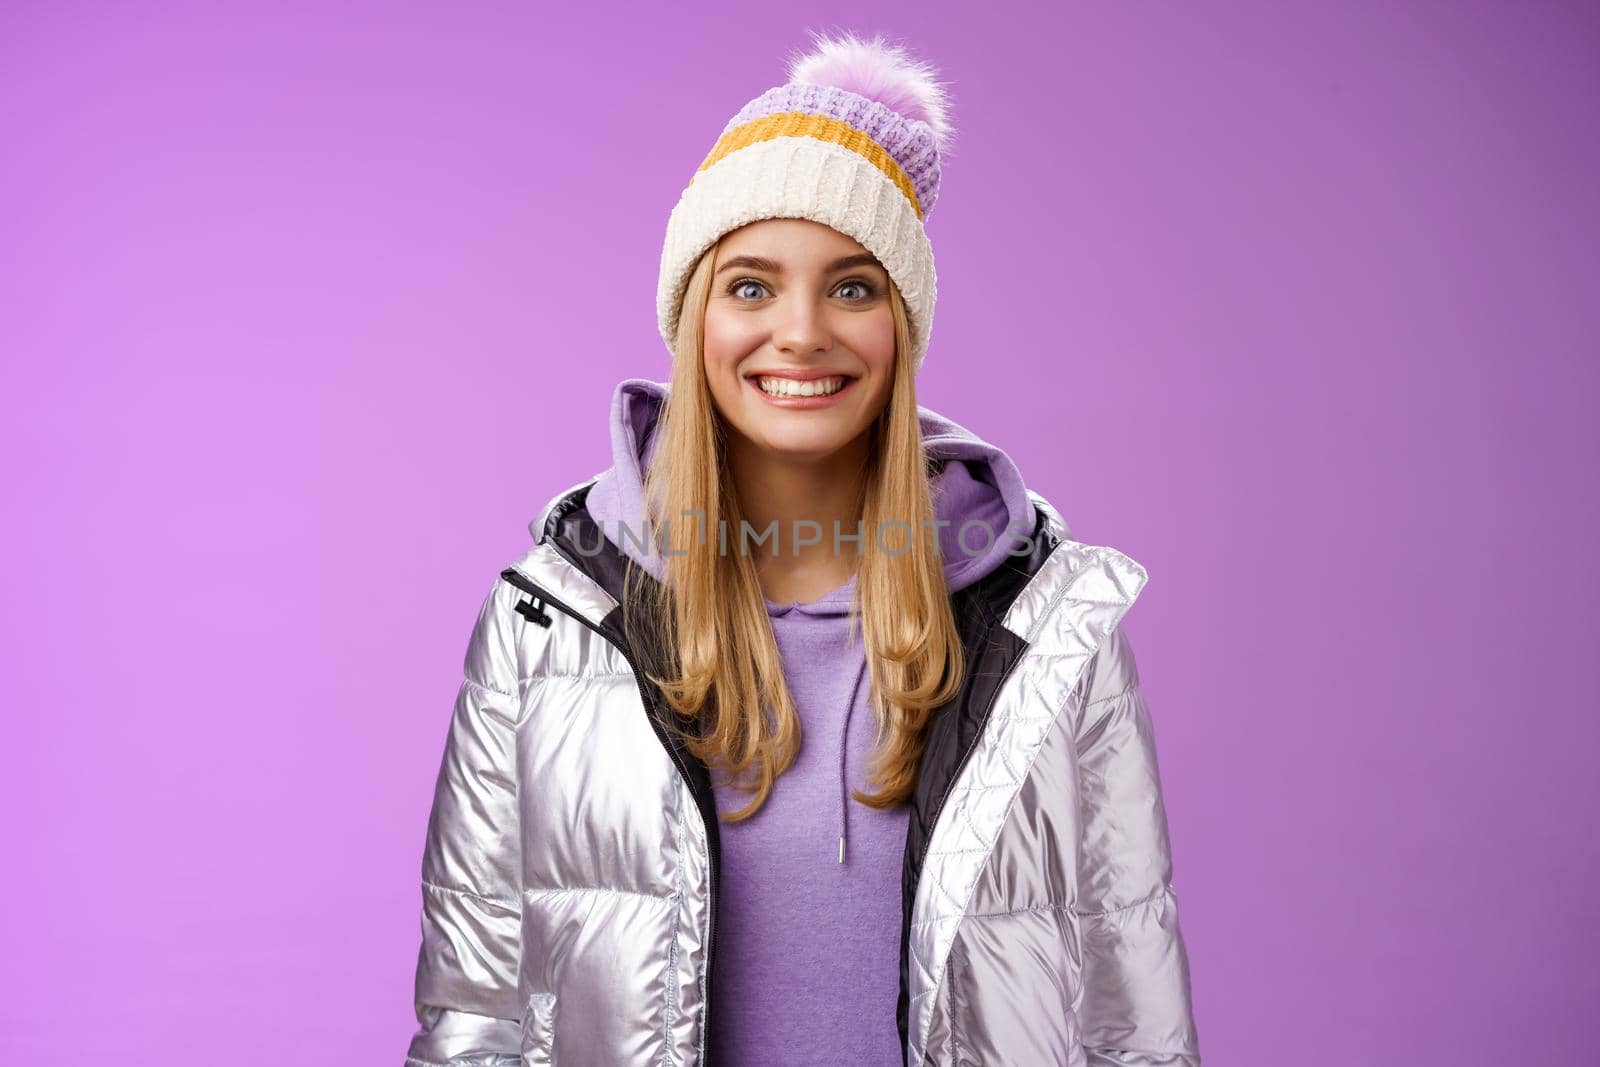 Amused fascinated attractive excited blond woman stepping skis first time feel temptation thrill joyfully smiling widen eyes impressed cannot wait learn snowboarding standing silver jacket.